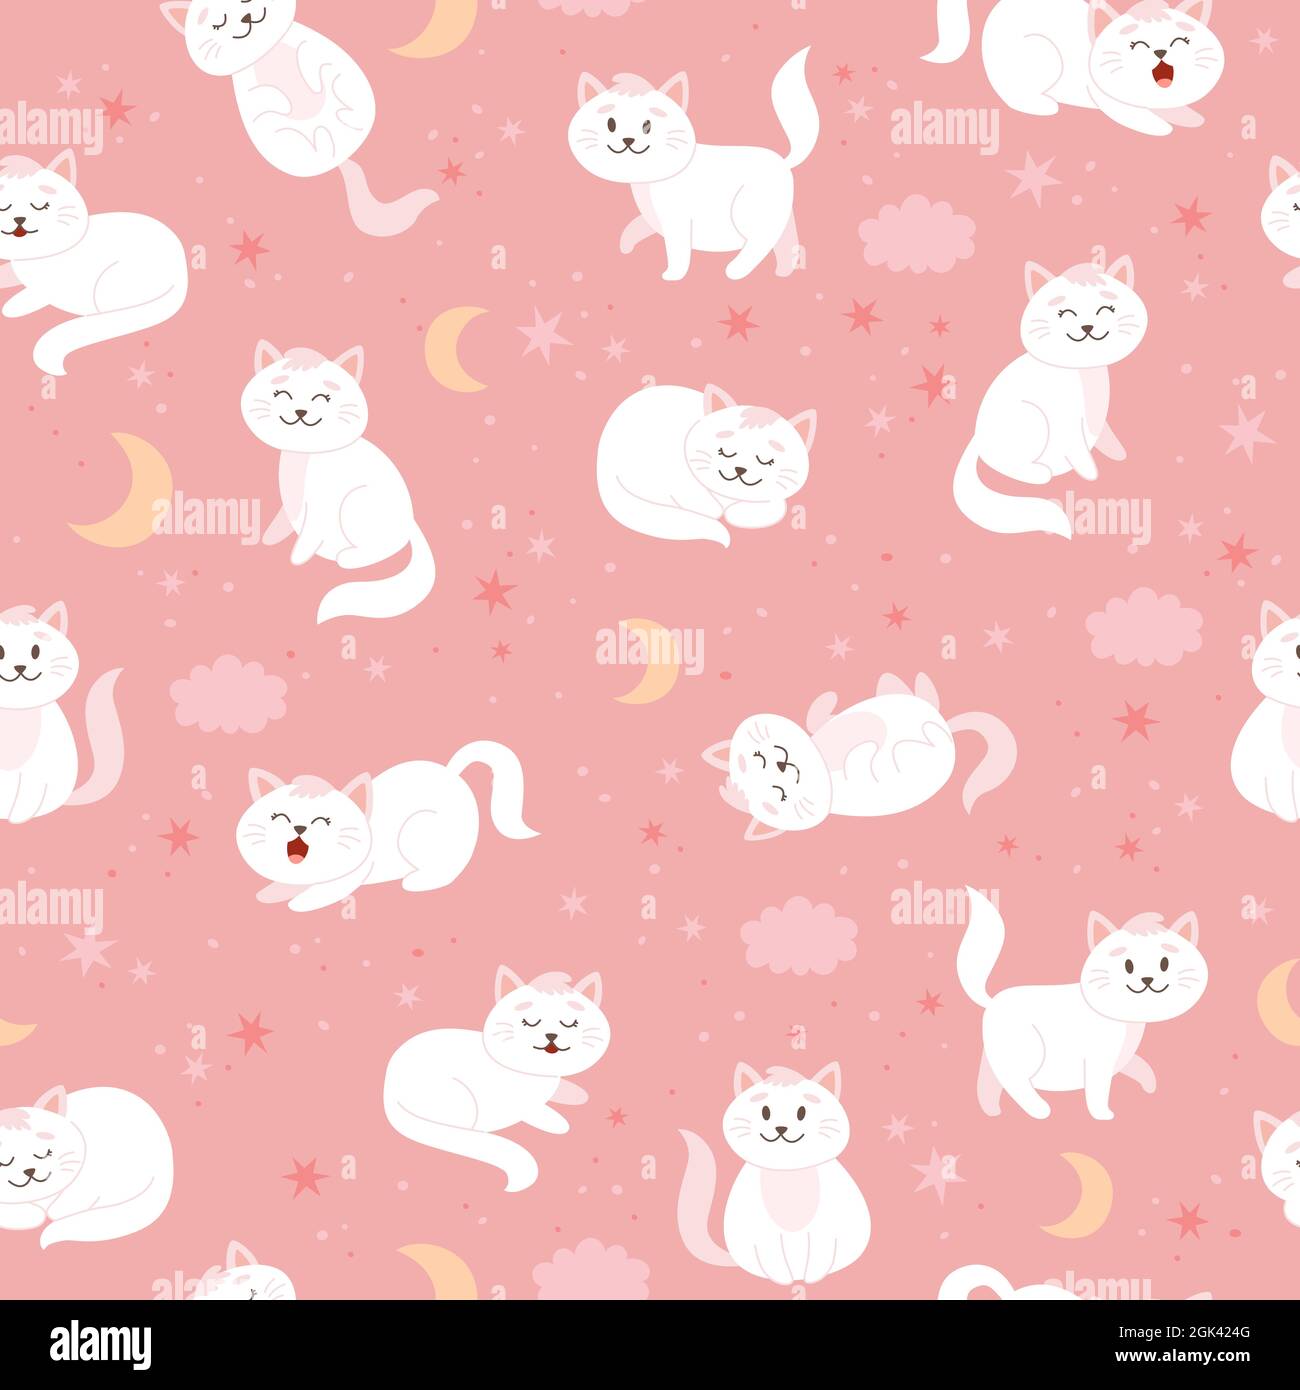 Cats pattern with moon stars and clouds cute white cat character in cartoon style vector illustration stock vector image art